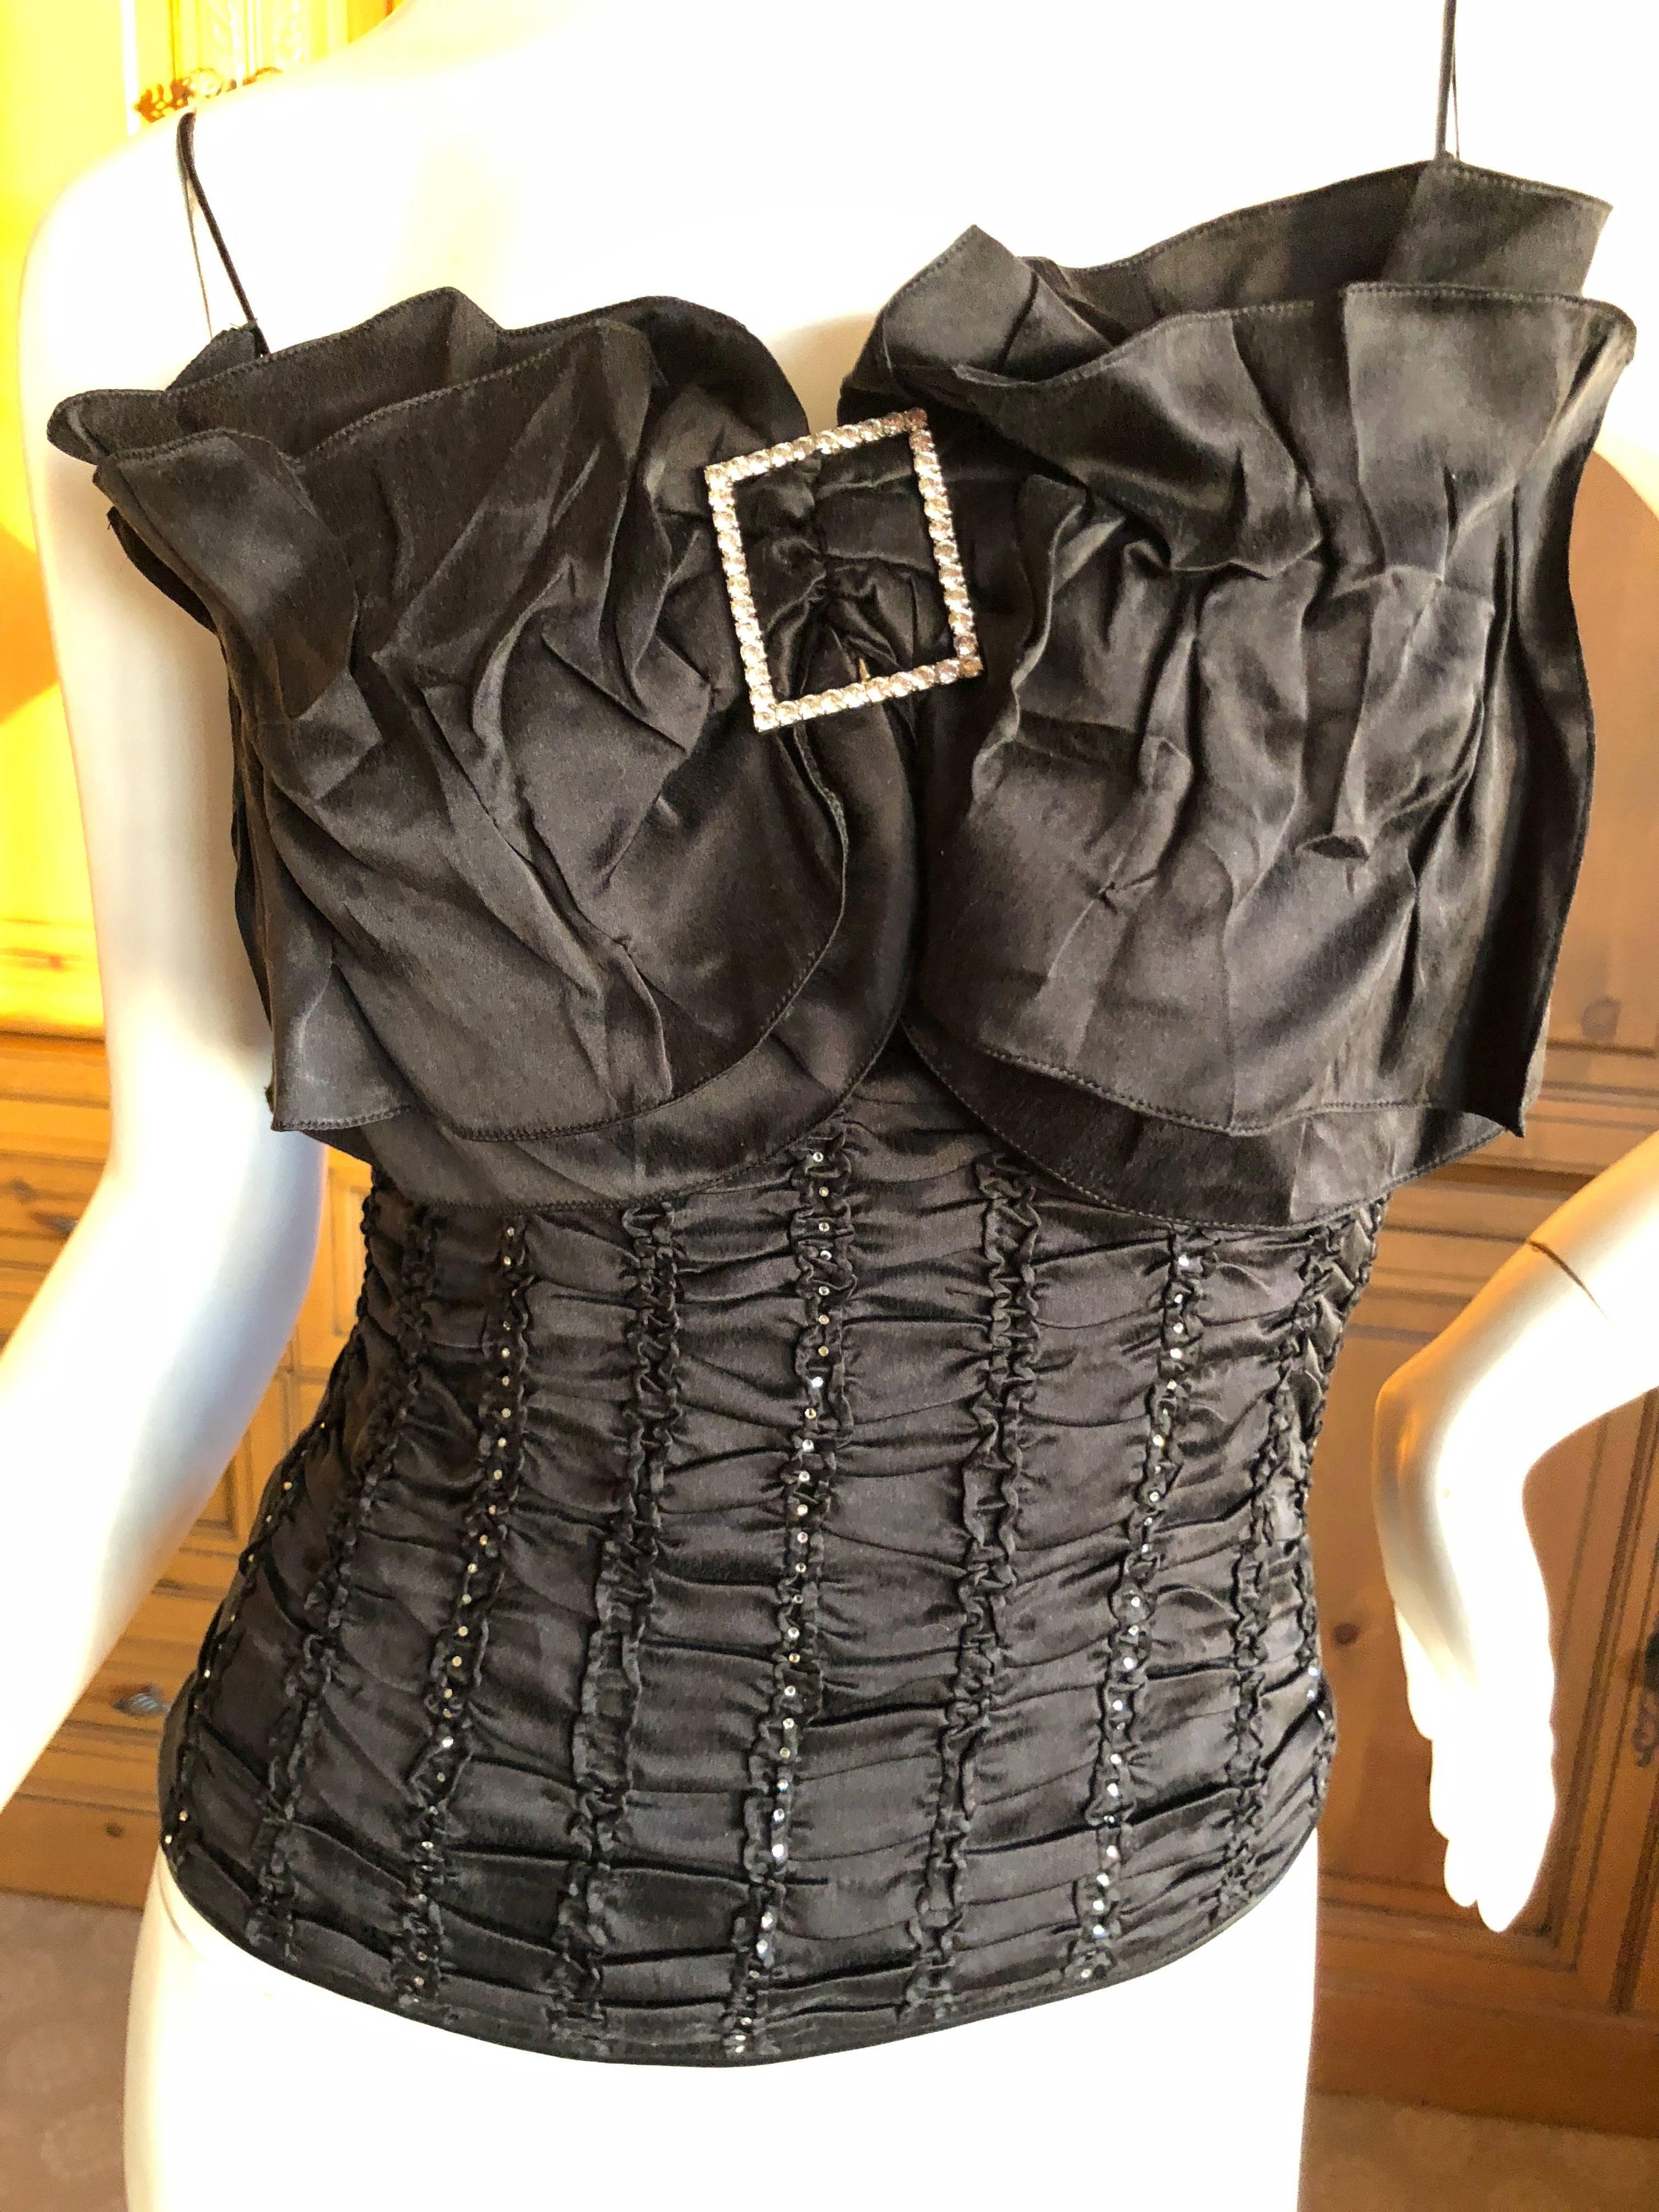  John Galliano Vintage Crystal Embellished Black Silk Top with Exaggerated Bow
Size 36
 Bust 35